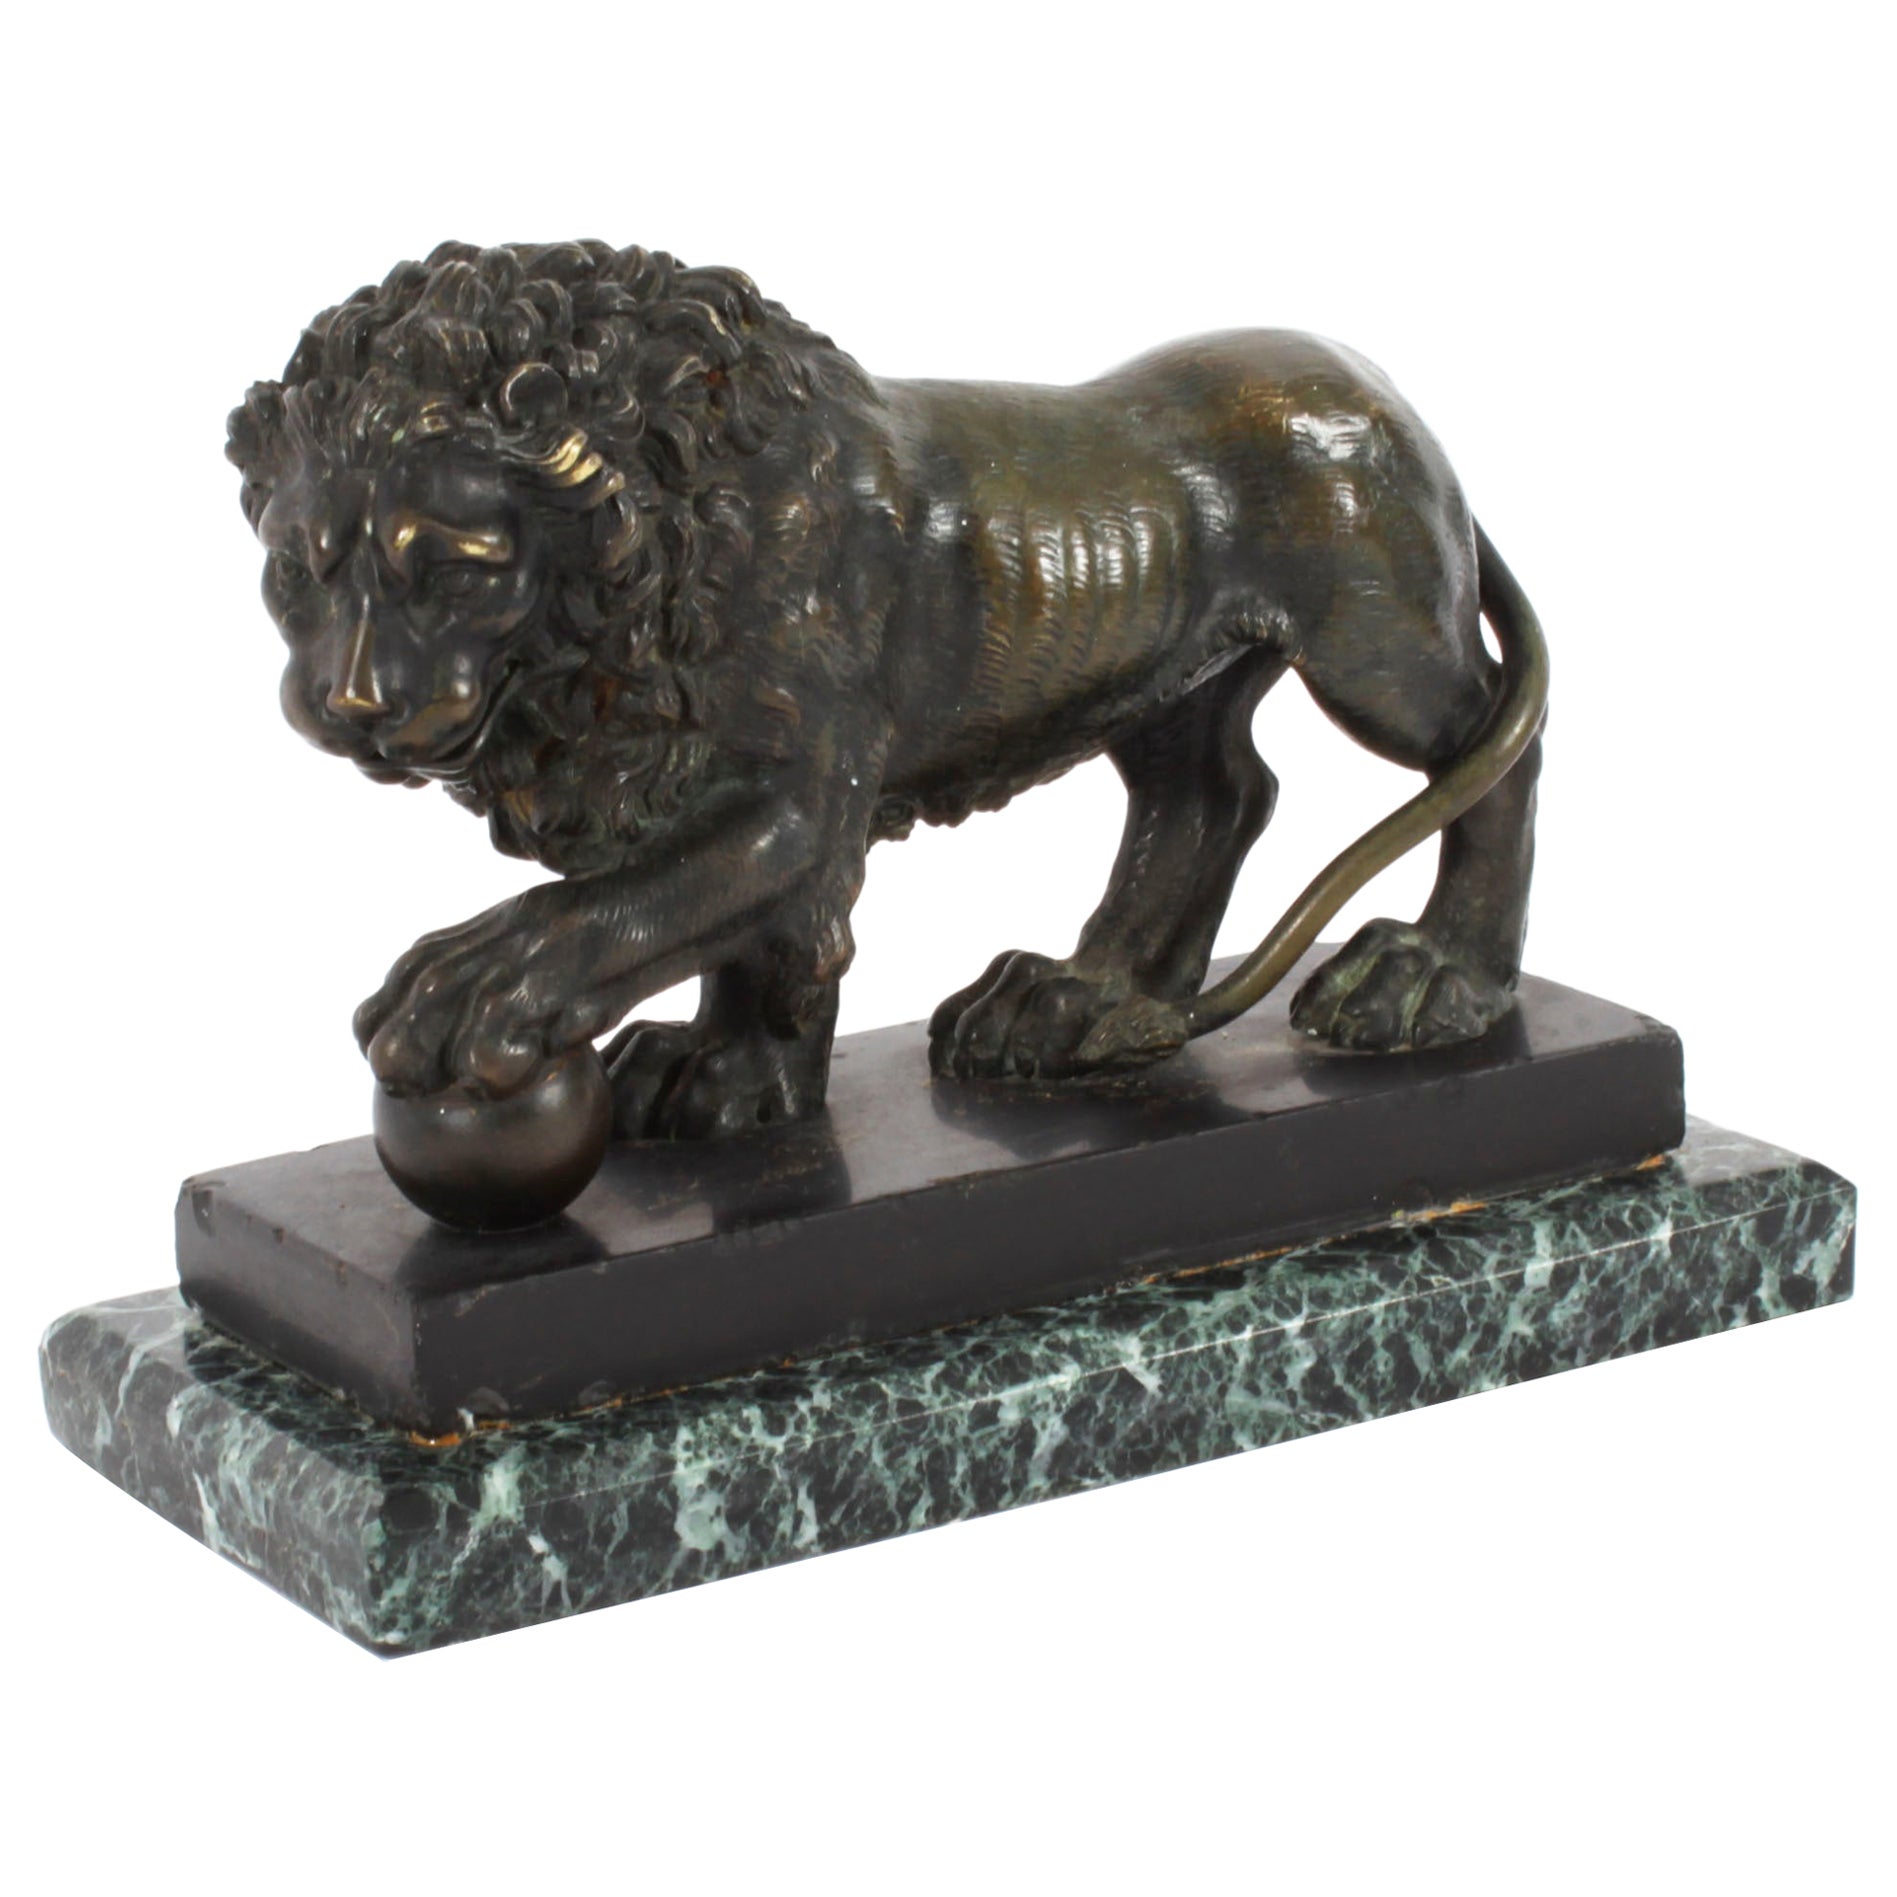 Antique French Bronze Sculpture of the Medici Lion, 19th Century